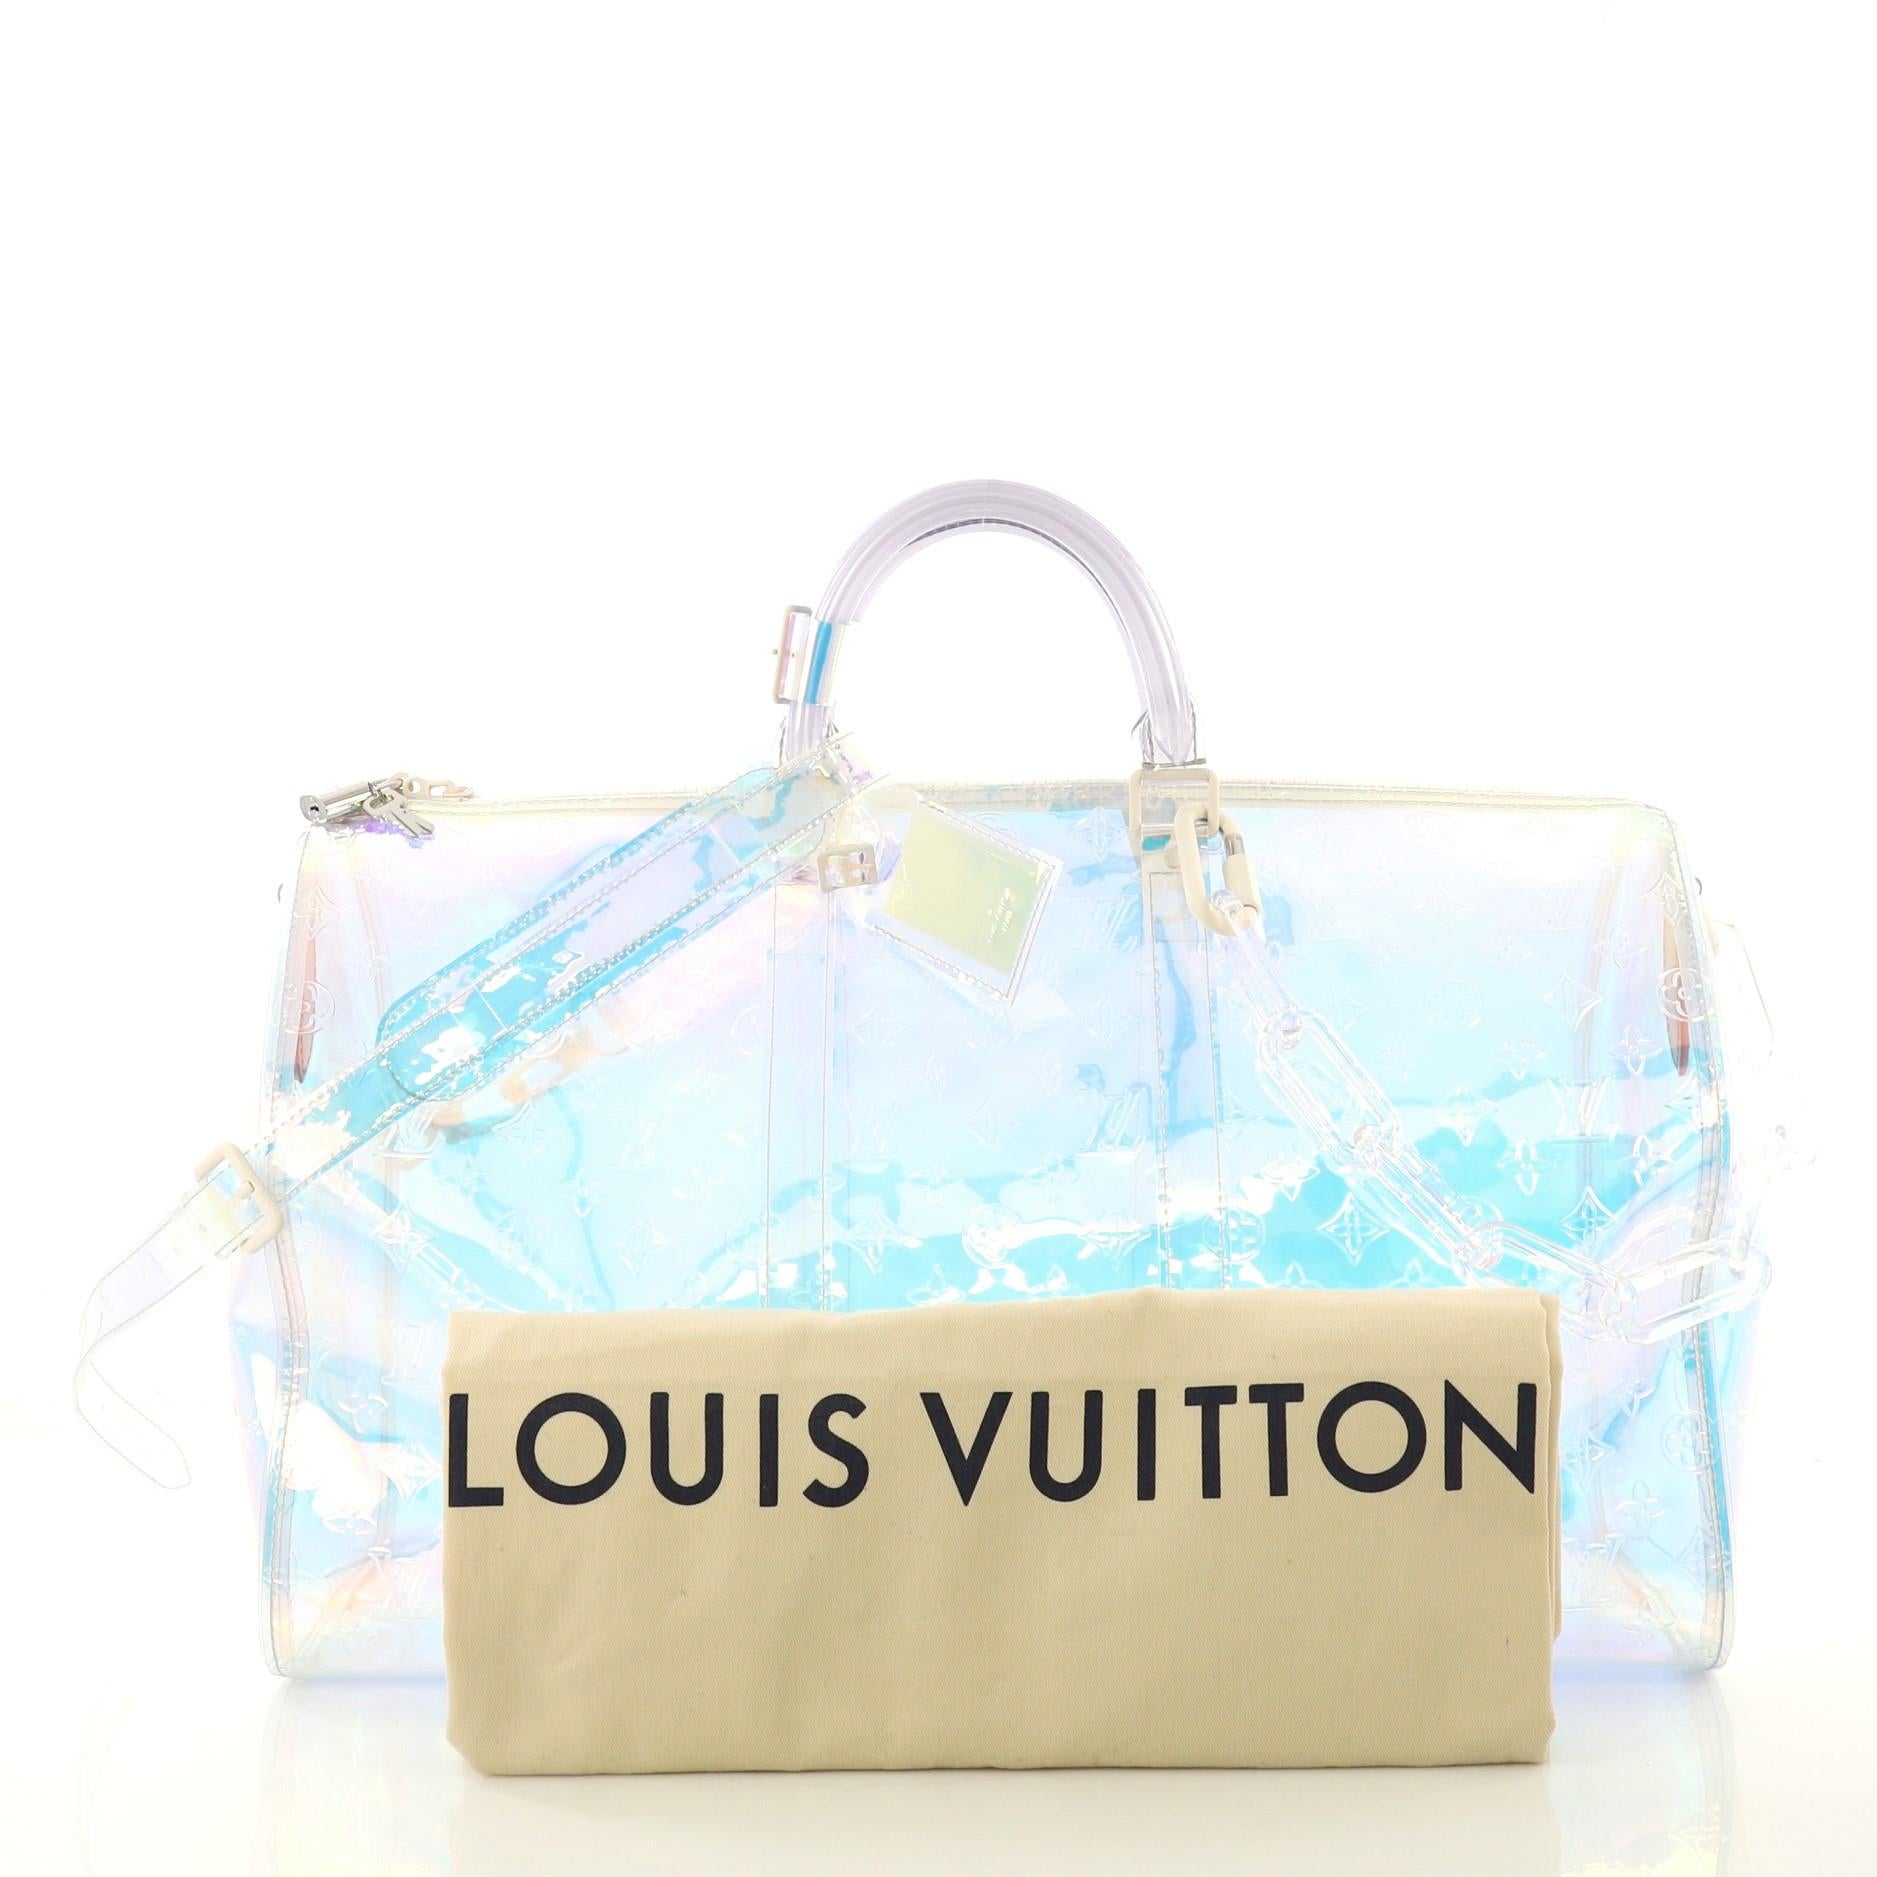 This Louis Vuitton Keepall Bandouliere Bag Limited Edition Monogram Prism PVC 50, crafted in iridescent monogram prism PVC, features dual rolled handles, resin chain, and white-tone hardware. Its zip closure opens to an iridescent monogram prism PVC